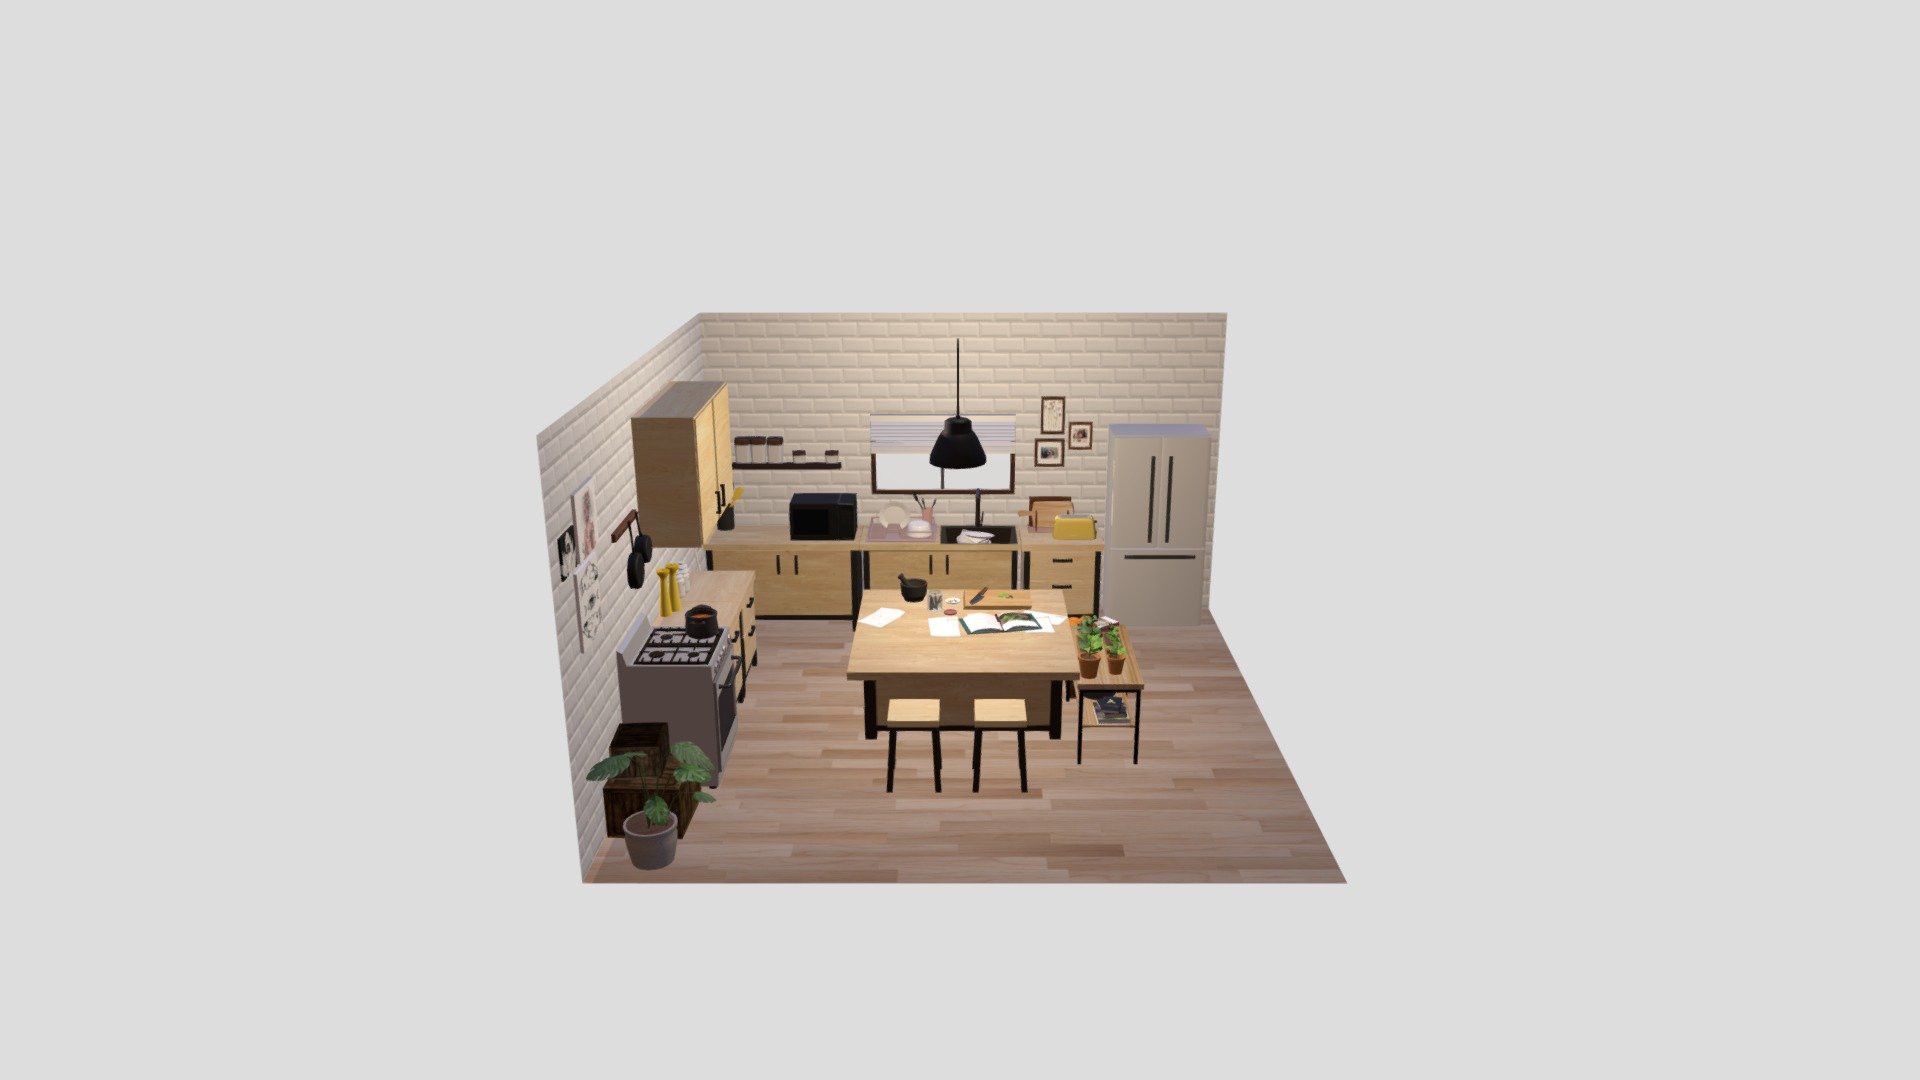 This was a fun little project that I did for a college. Project was to create an interior room with any theme. I decided to base my room on the general aesthetic of my Animal Crossing New Horizons kitchen with some minimal, fantasy elements. 

I used Autodesk Maya and Adobe Photoshop CC 3d model